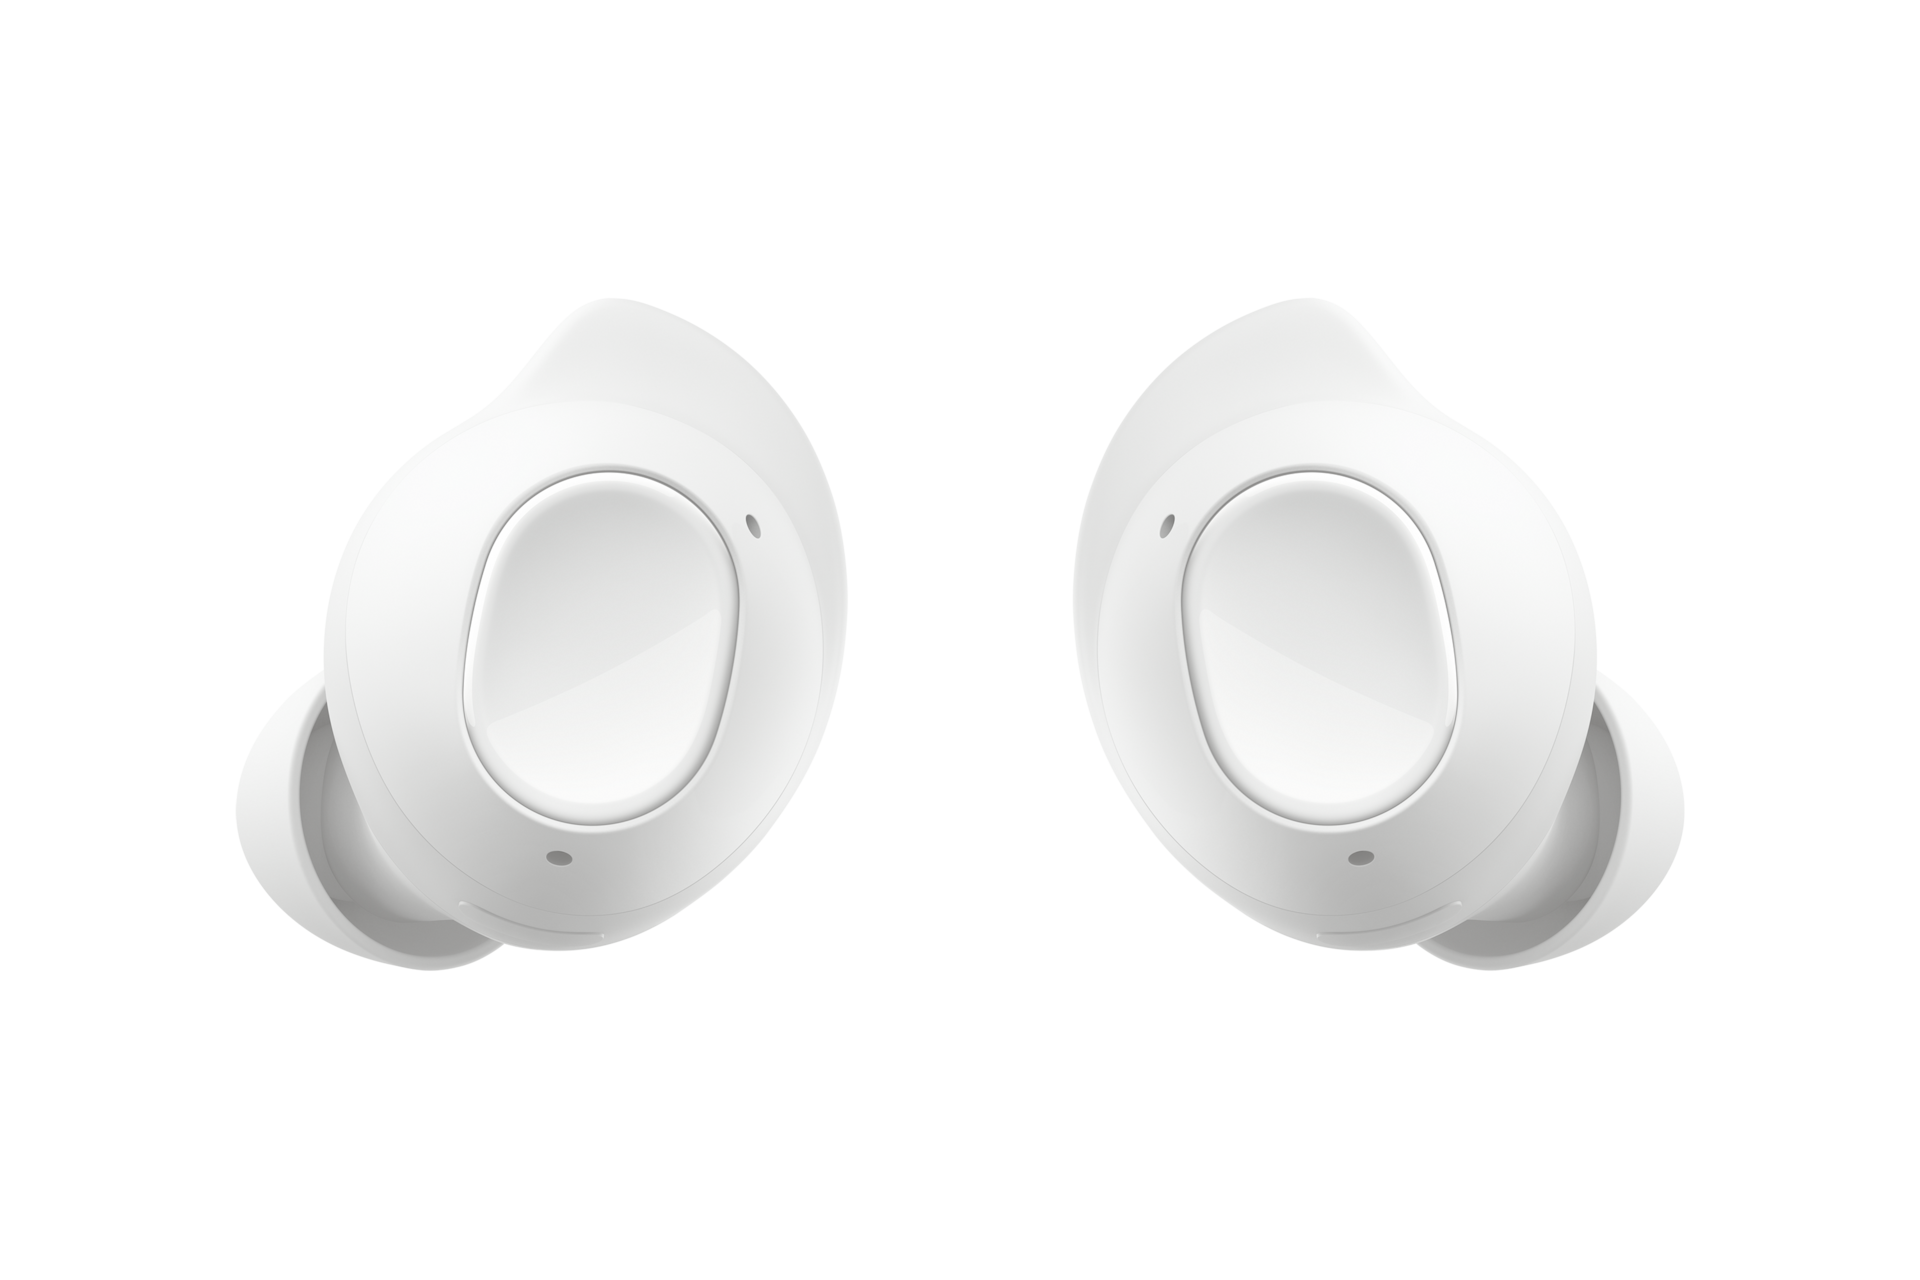 Buy the Samsung Galaxy Buds FE in White color at Samsung Malaysia.